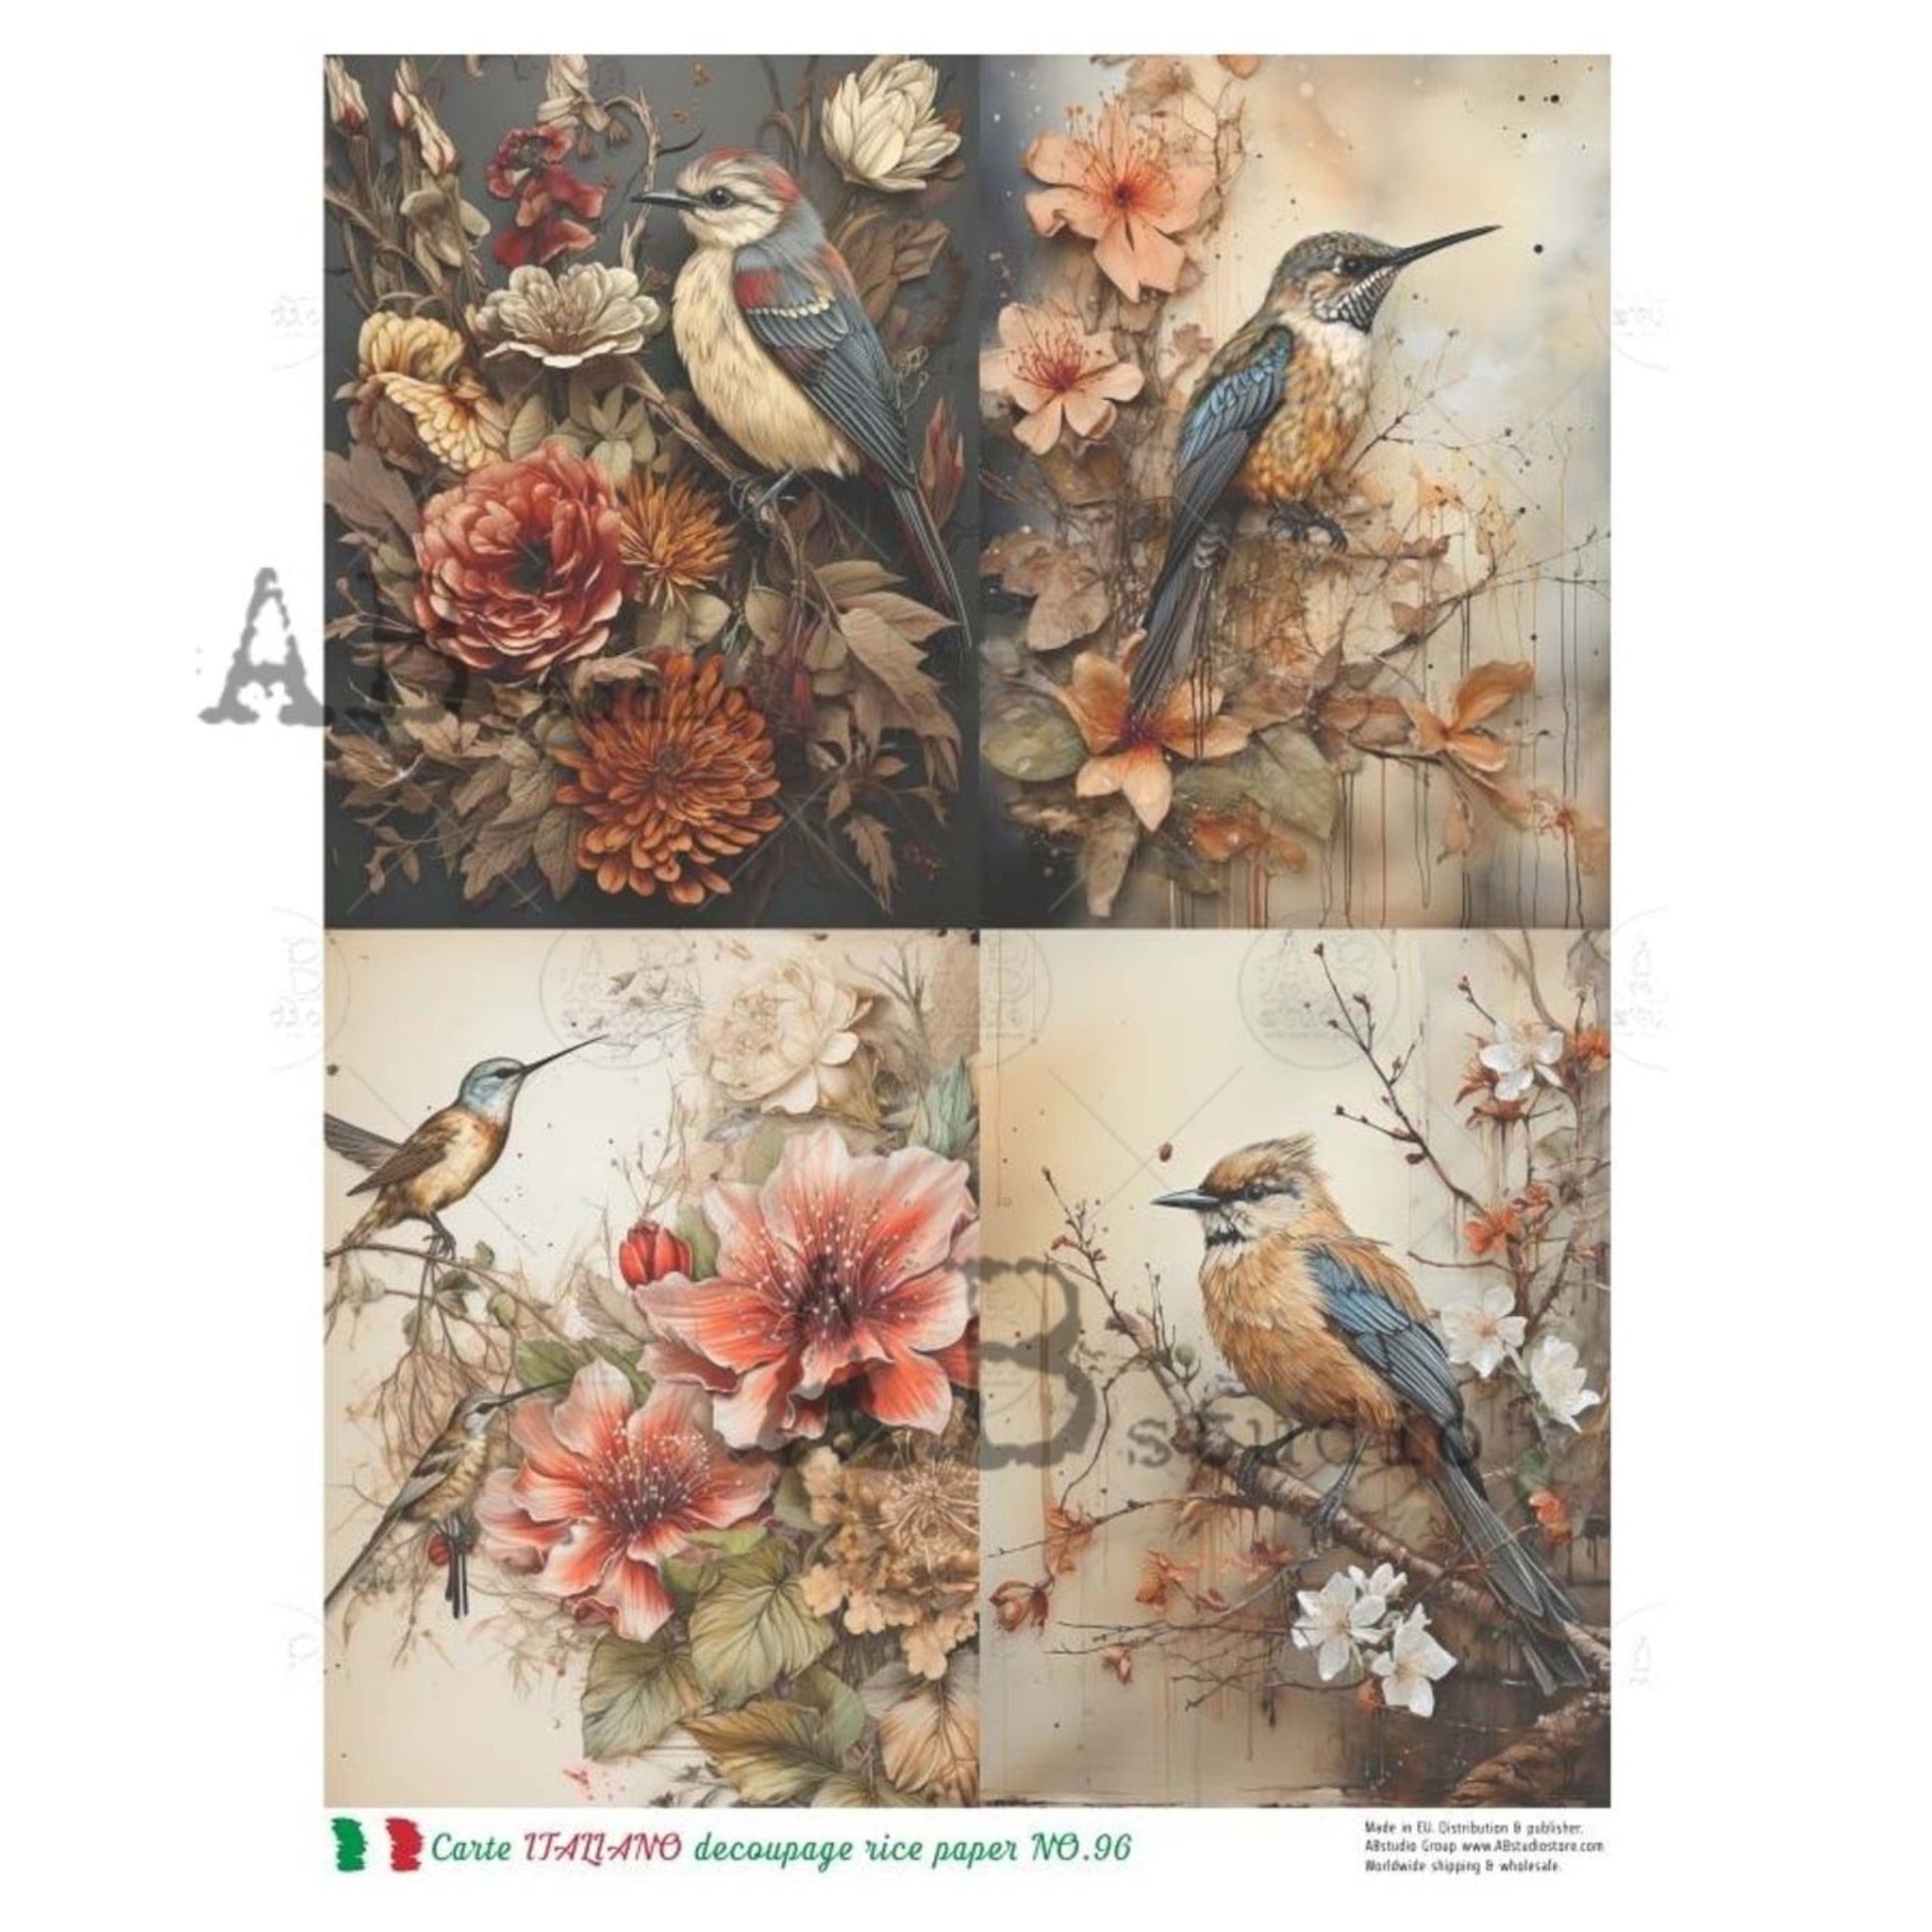 A4 rice paper featuring 4 beautiful images of birds surrounded by clusters of flowers.